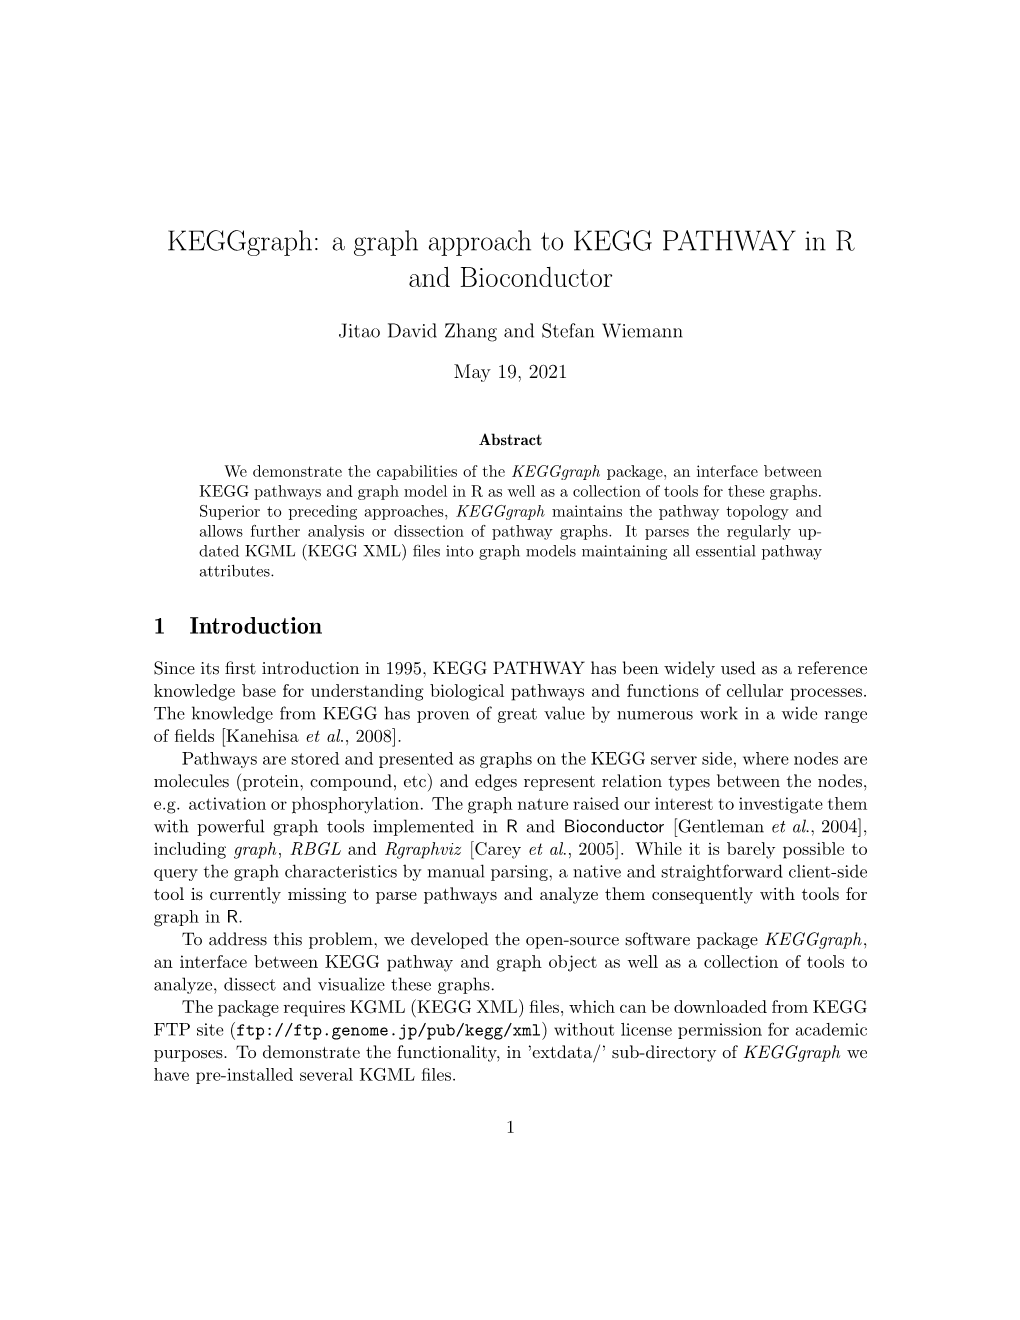 Kegggraph: a Graph Approach to KEGG PATHWAY in R and Bioconductor